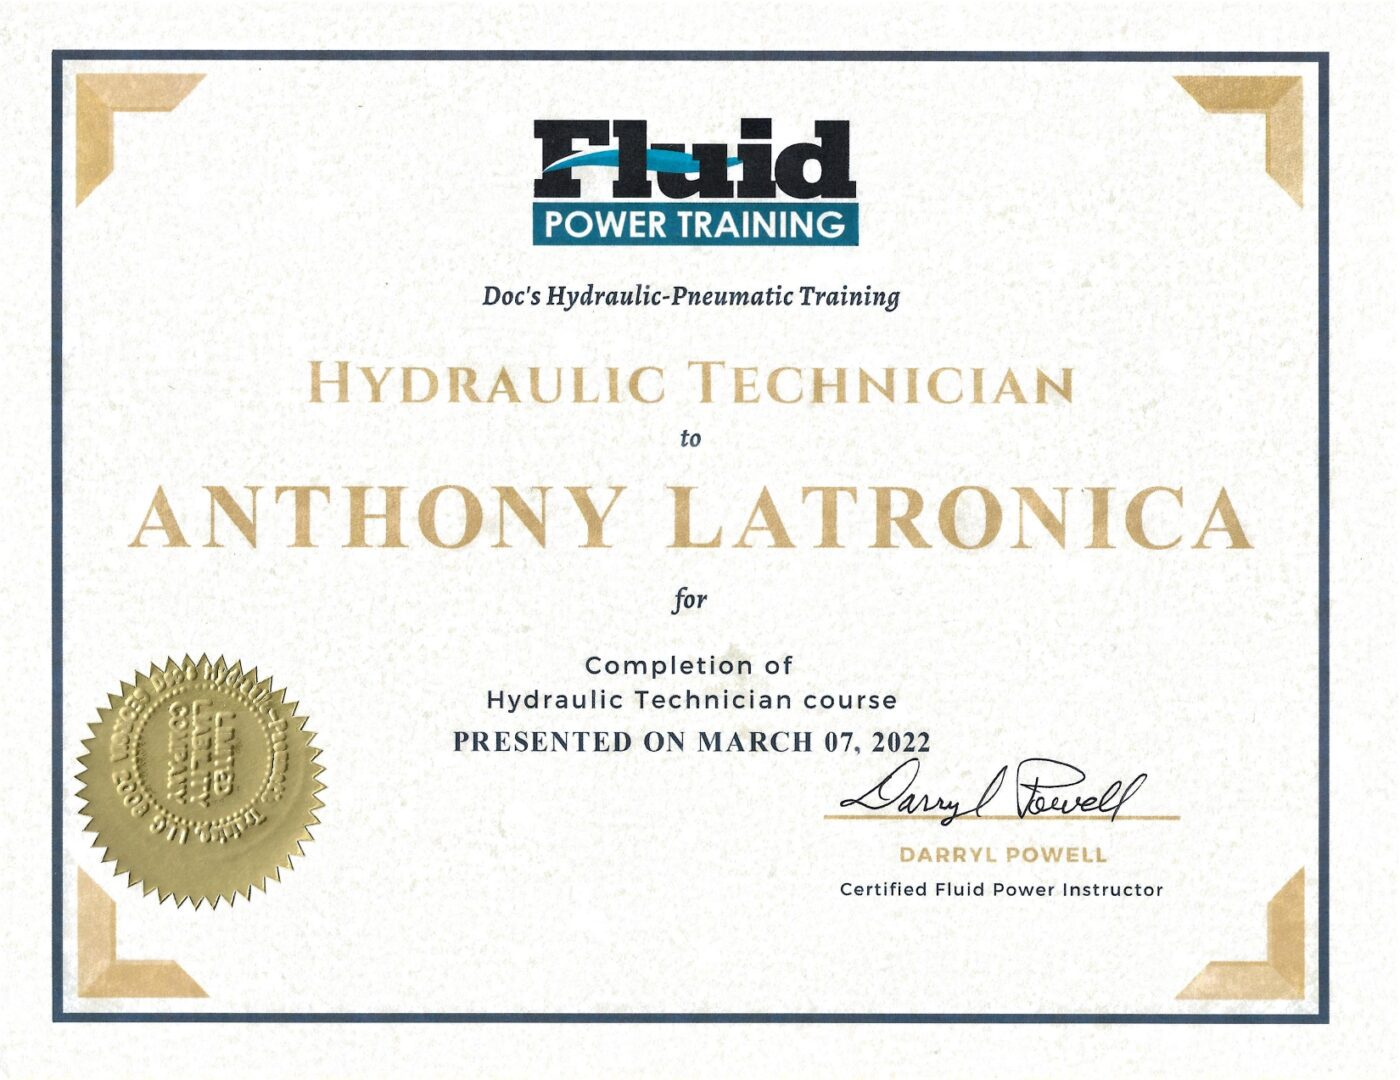 A certificate of completion for a hydraulic technician.